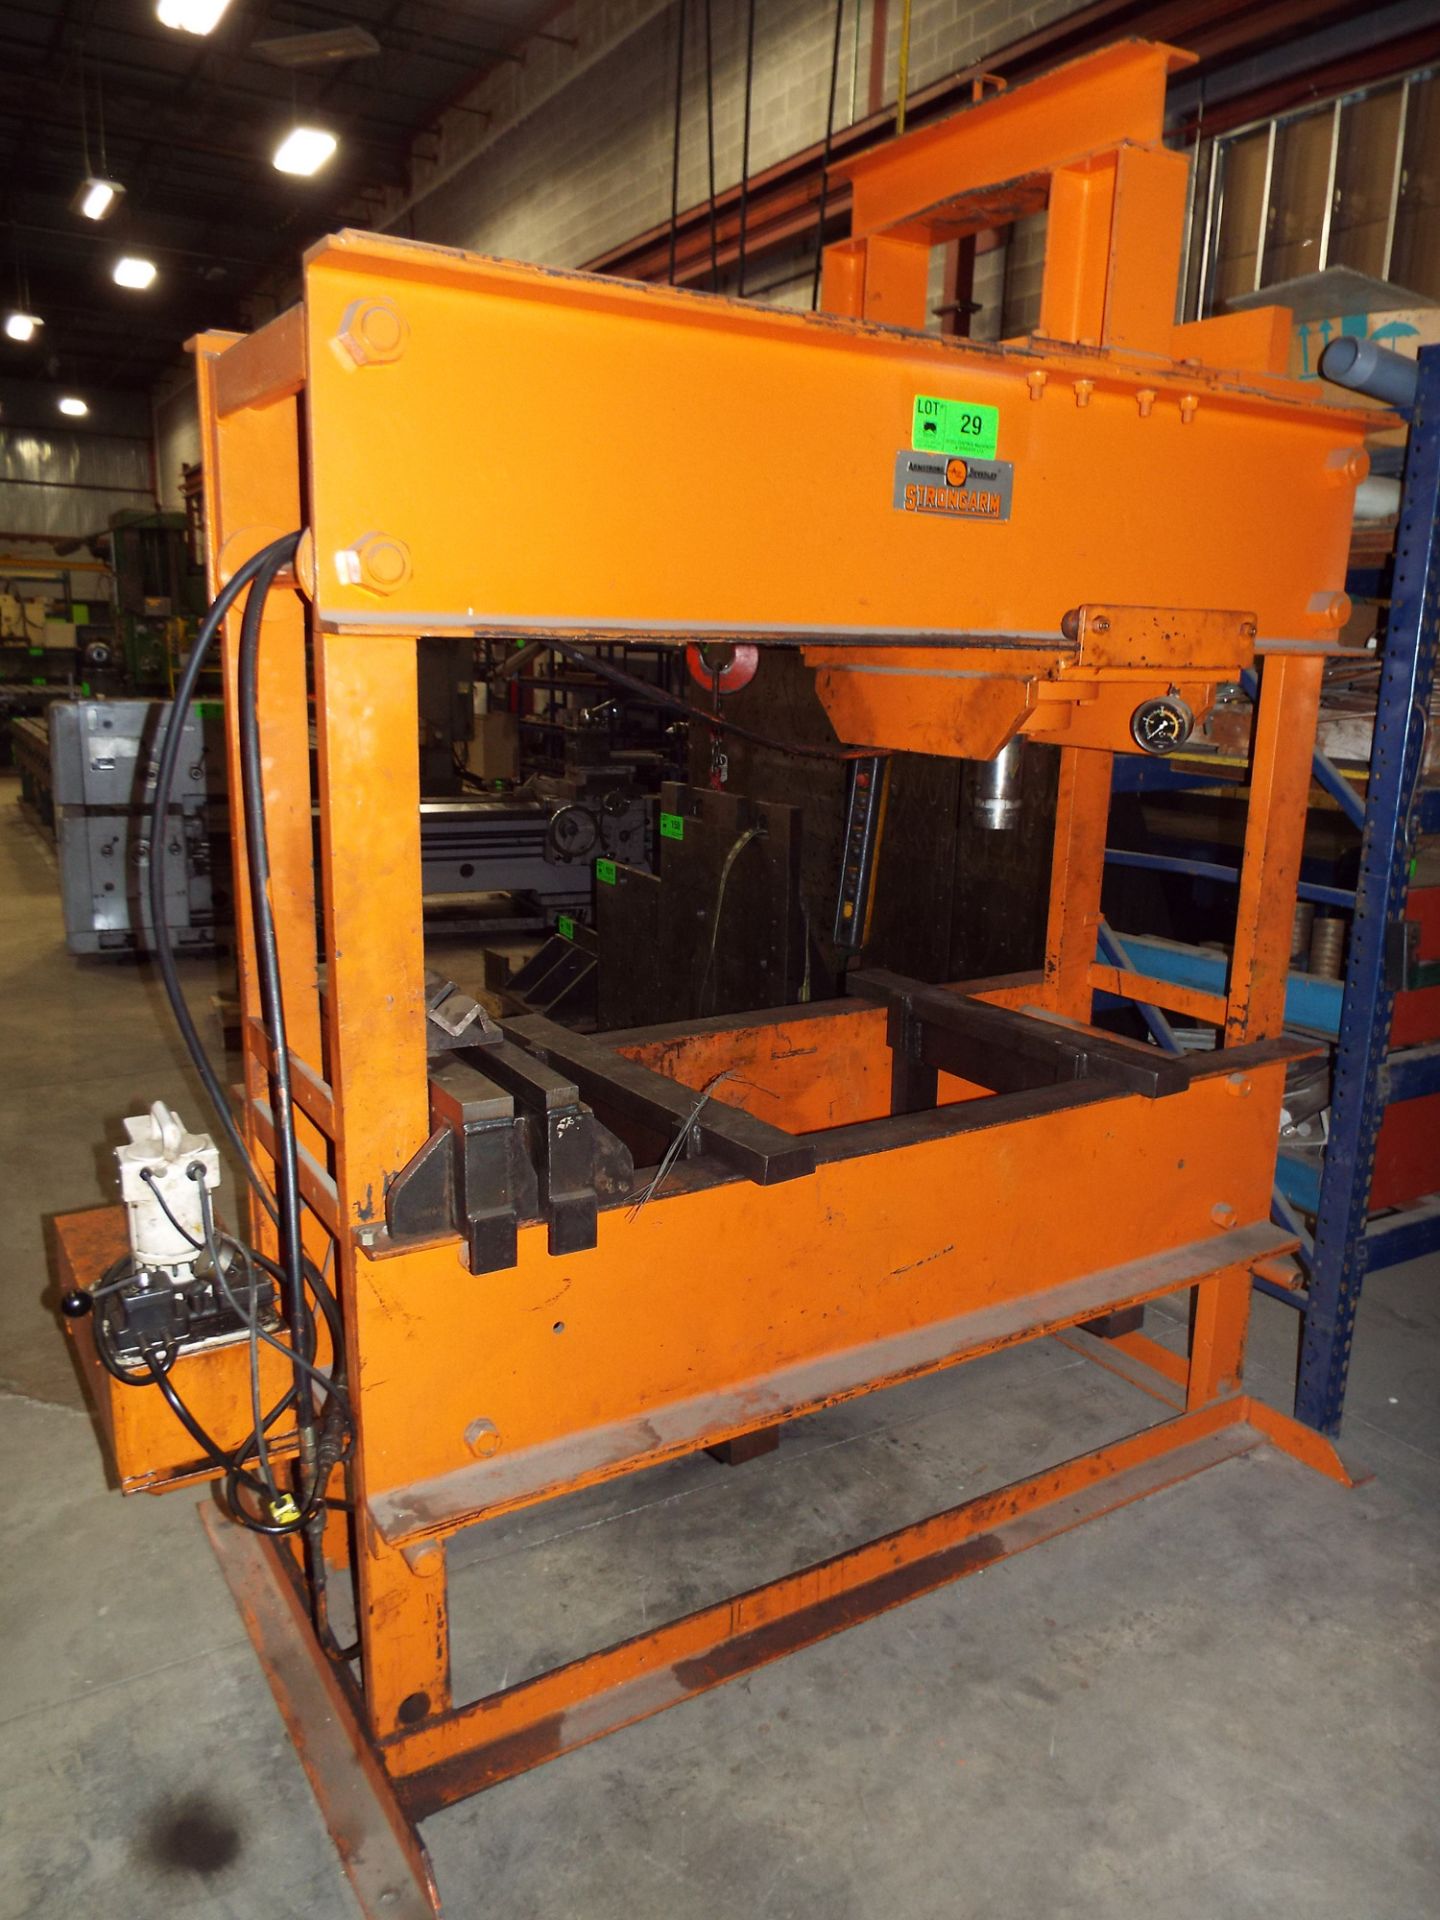 ARMSTRONG BEVERLEY STRONGARM 200TON MAX. CAPACITY ELECTRO-HYDRAULIC H-FRAME HEAVY-DUTY SHOP PRESS, - Image 4 of 6